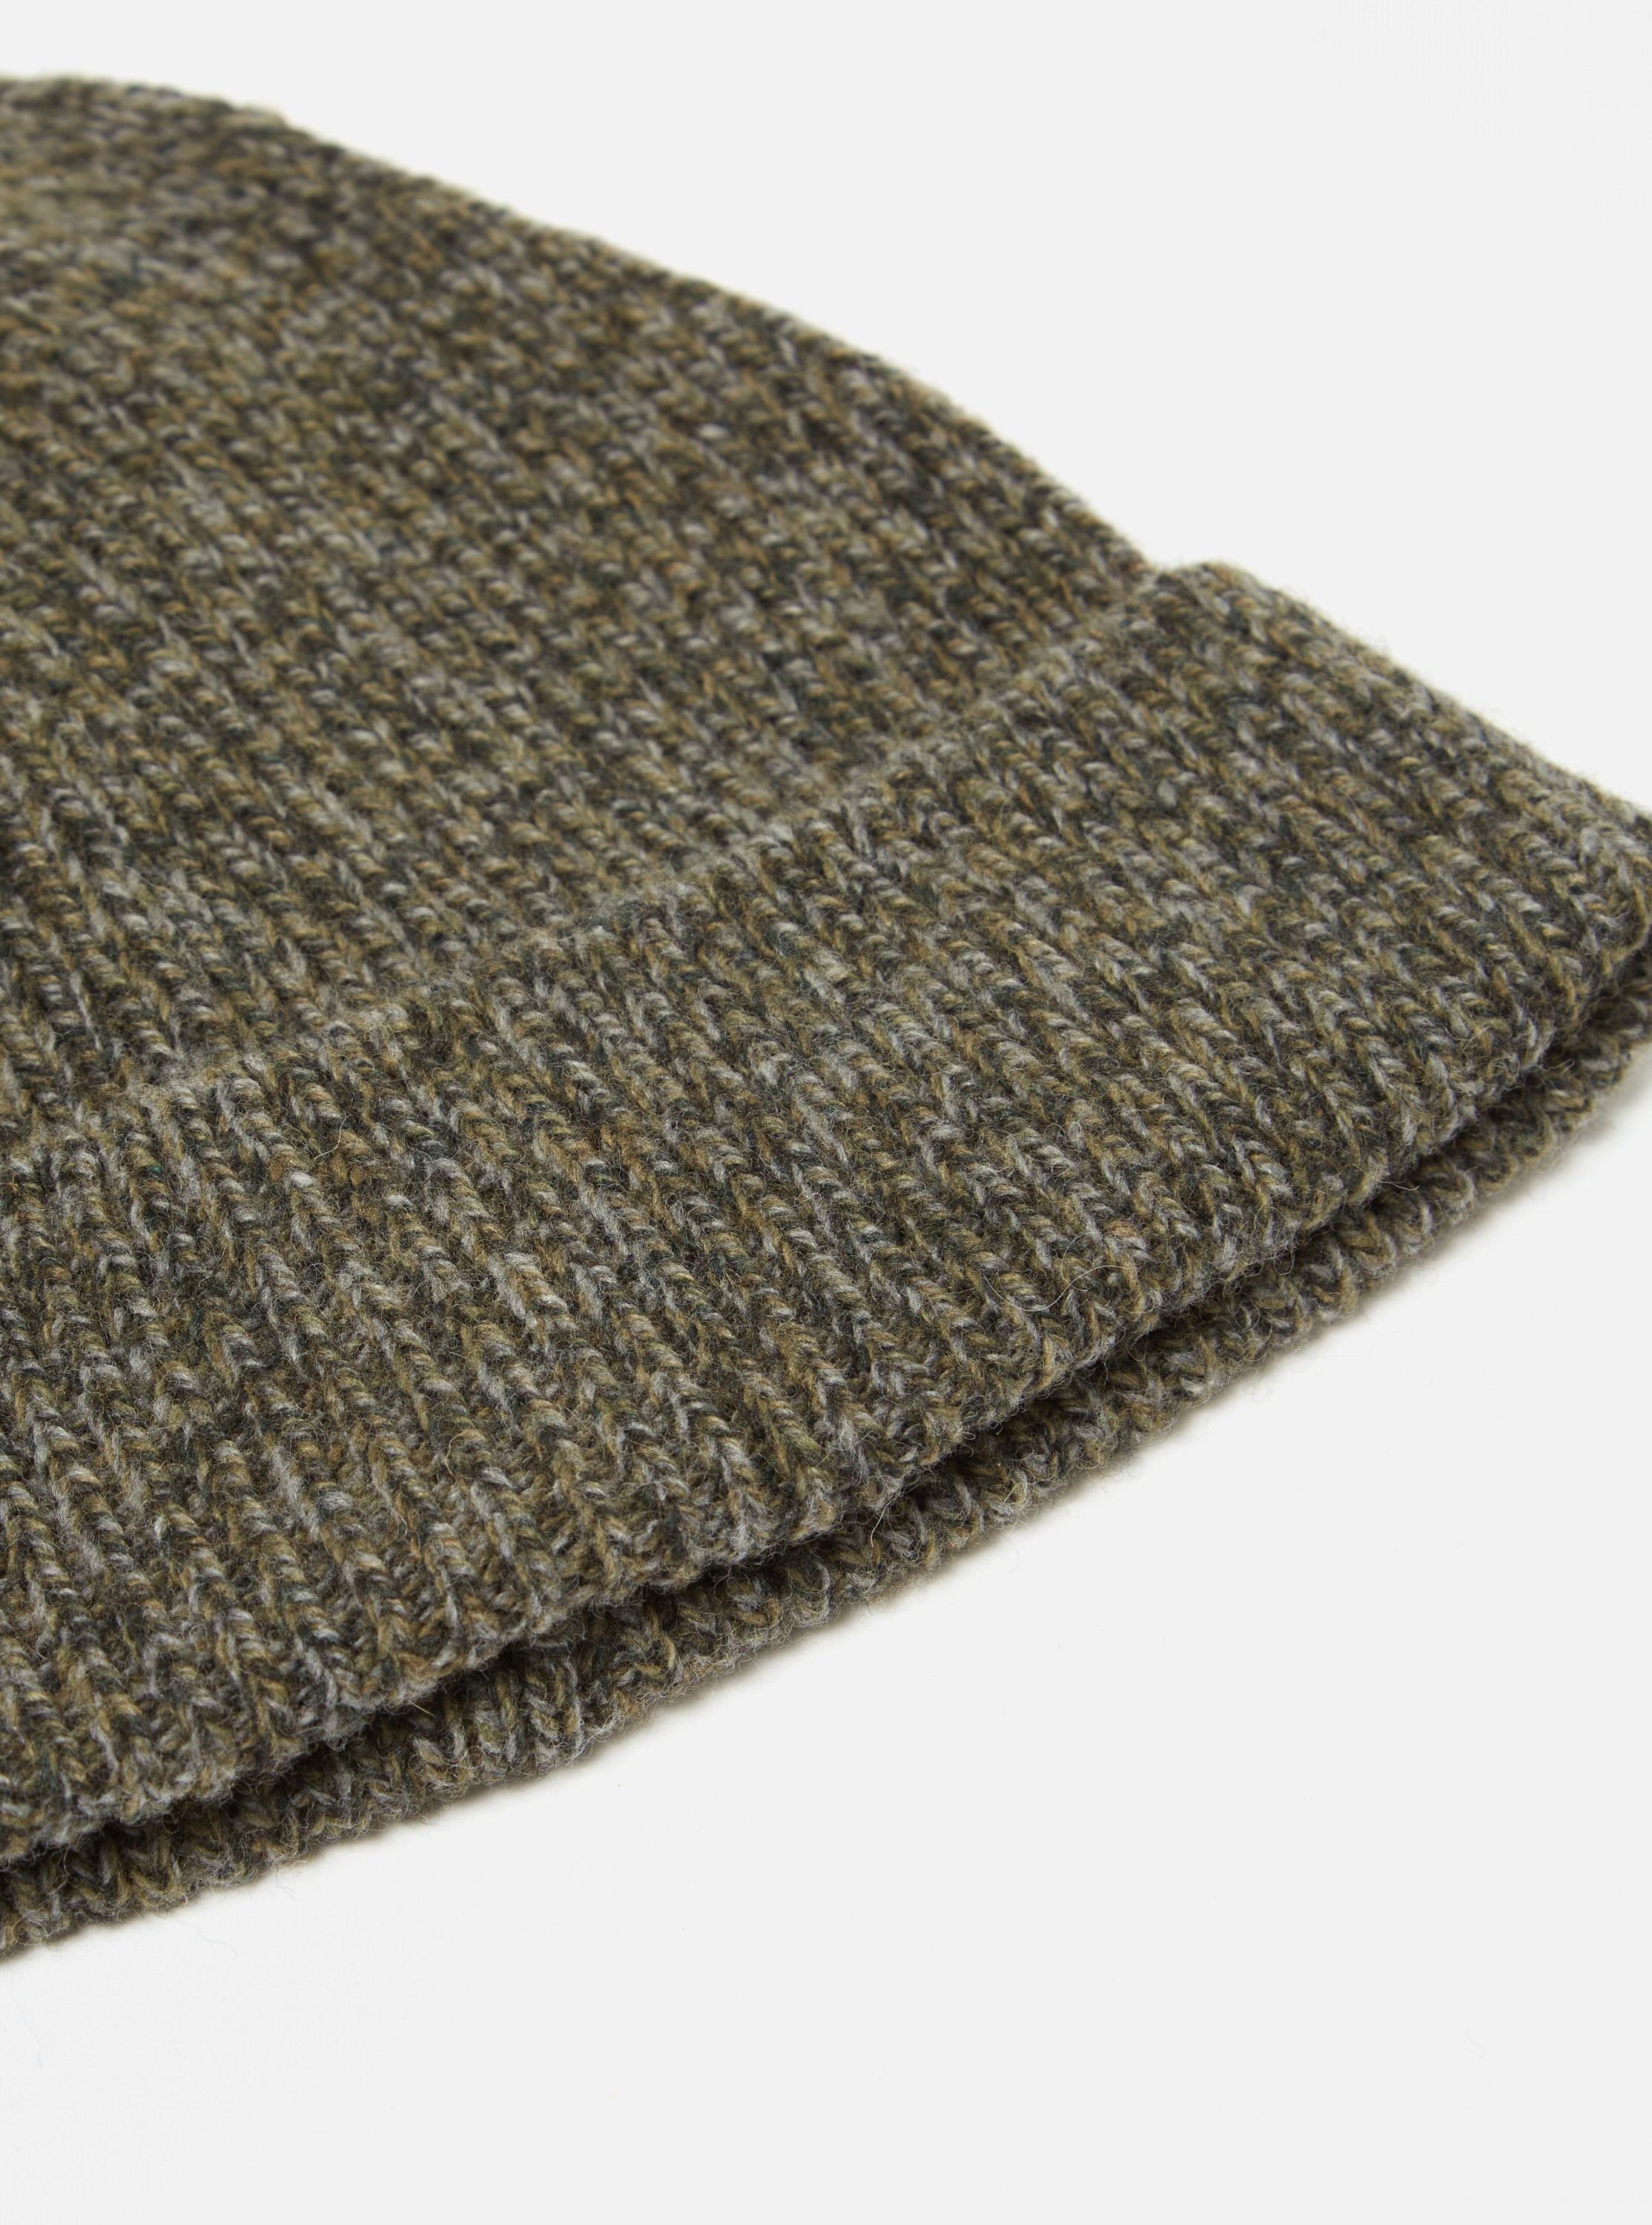 Universal Works Watch Cap in Olive Twisted Italian Wool